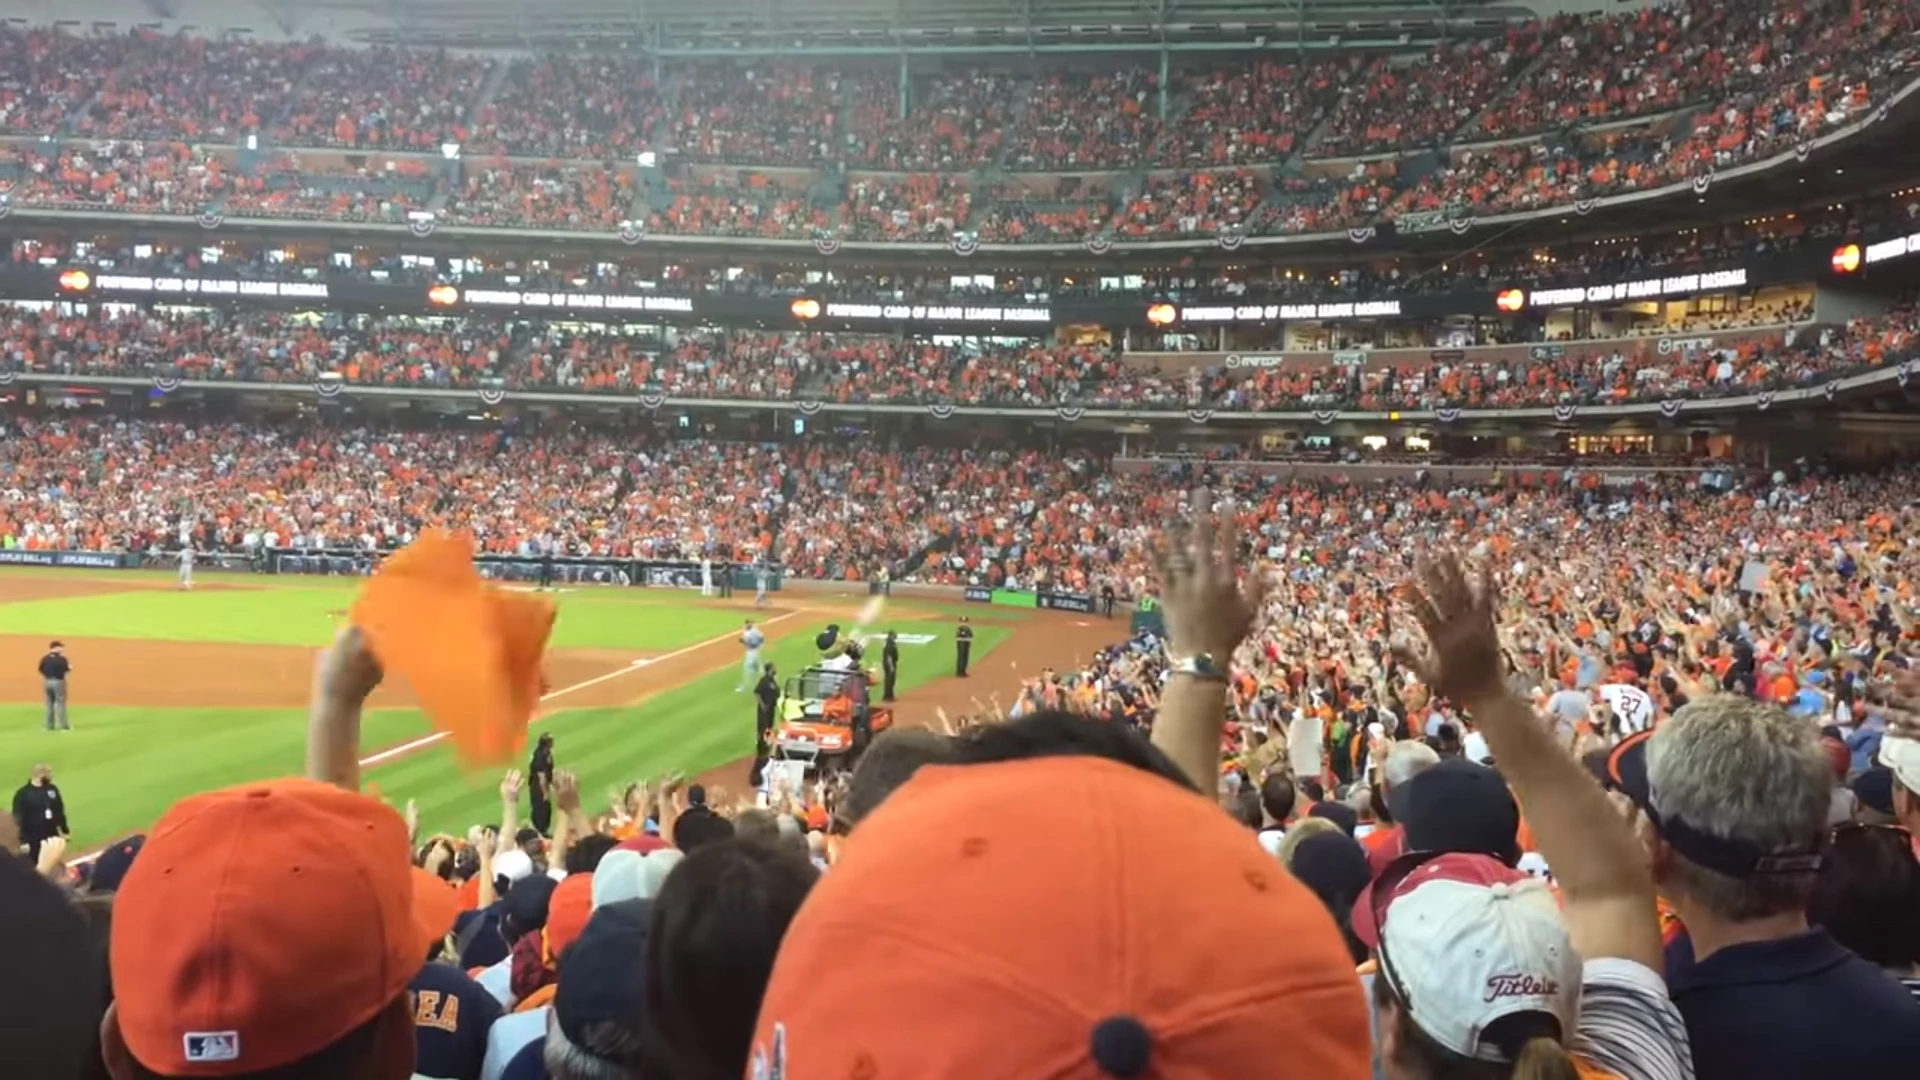 T-shirt cannon broke my finger, claims Houston Astros fan suing